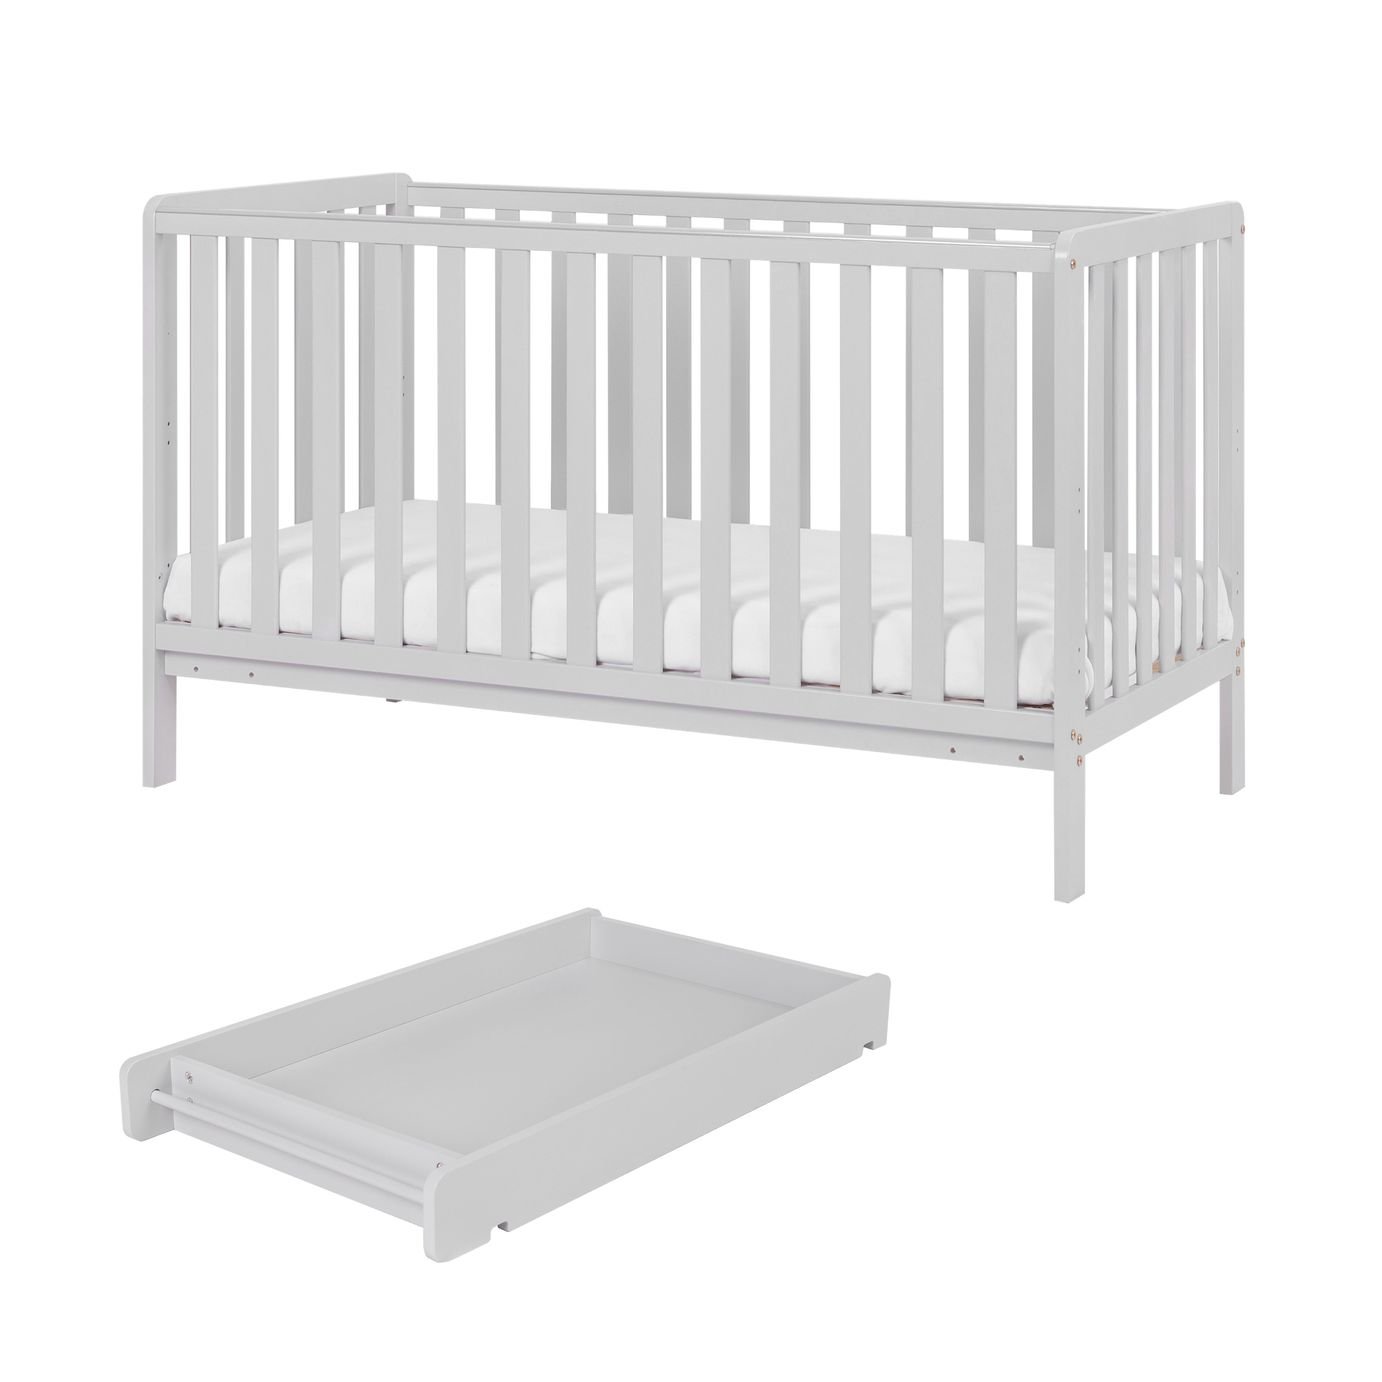 argos cot beds for sale